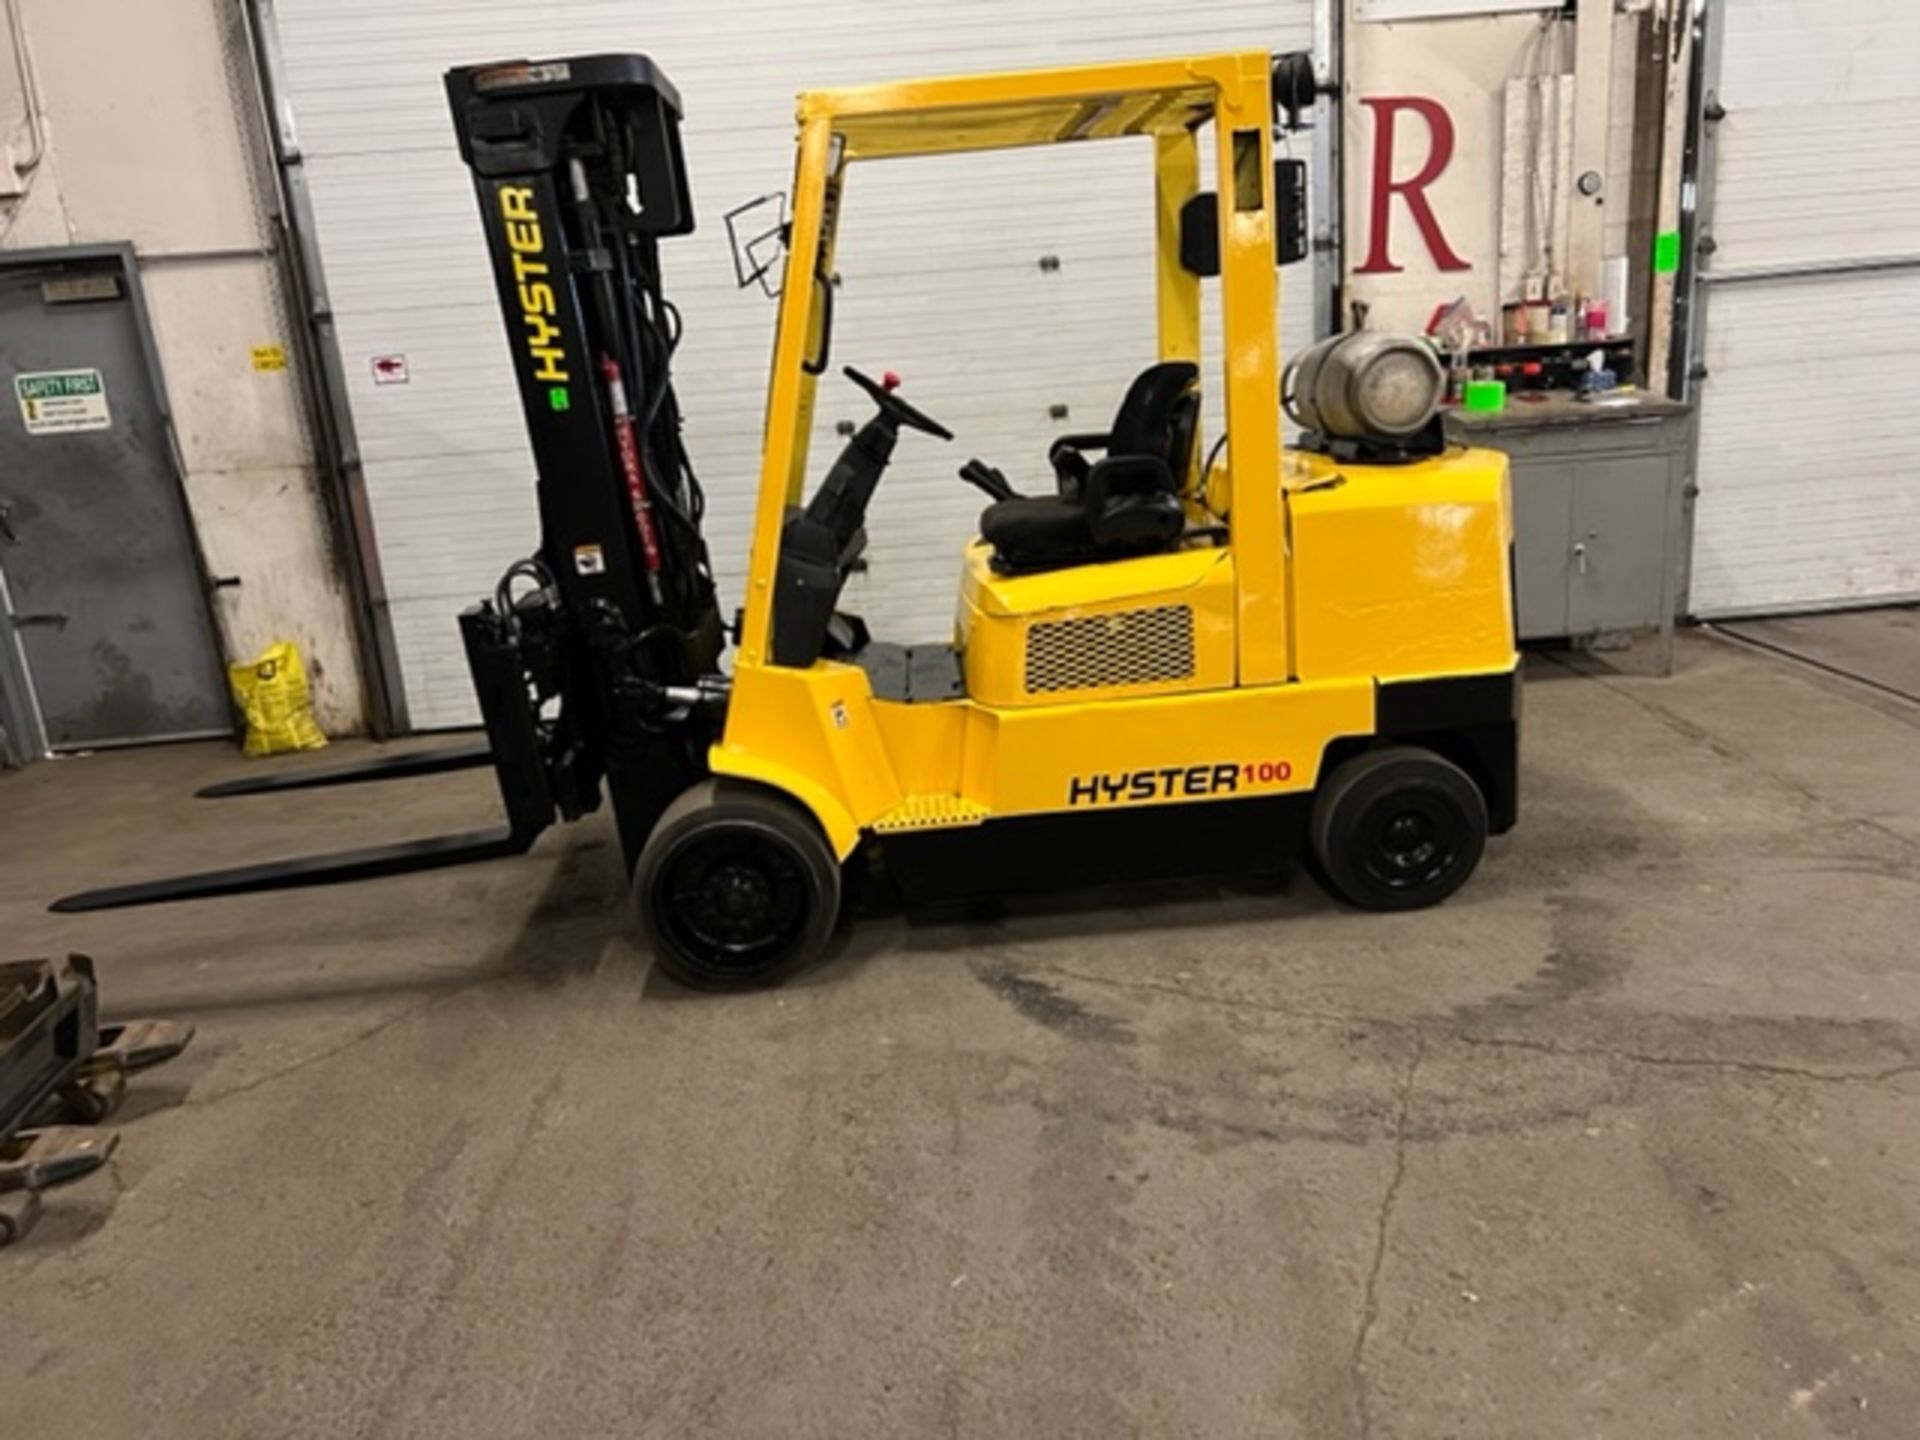 FREE CUSTOMS - NICE Hyster 10,000lbs Capacity Forklift LPG (propane) with SIDESHIFT & Fork